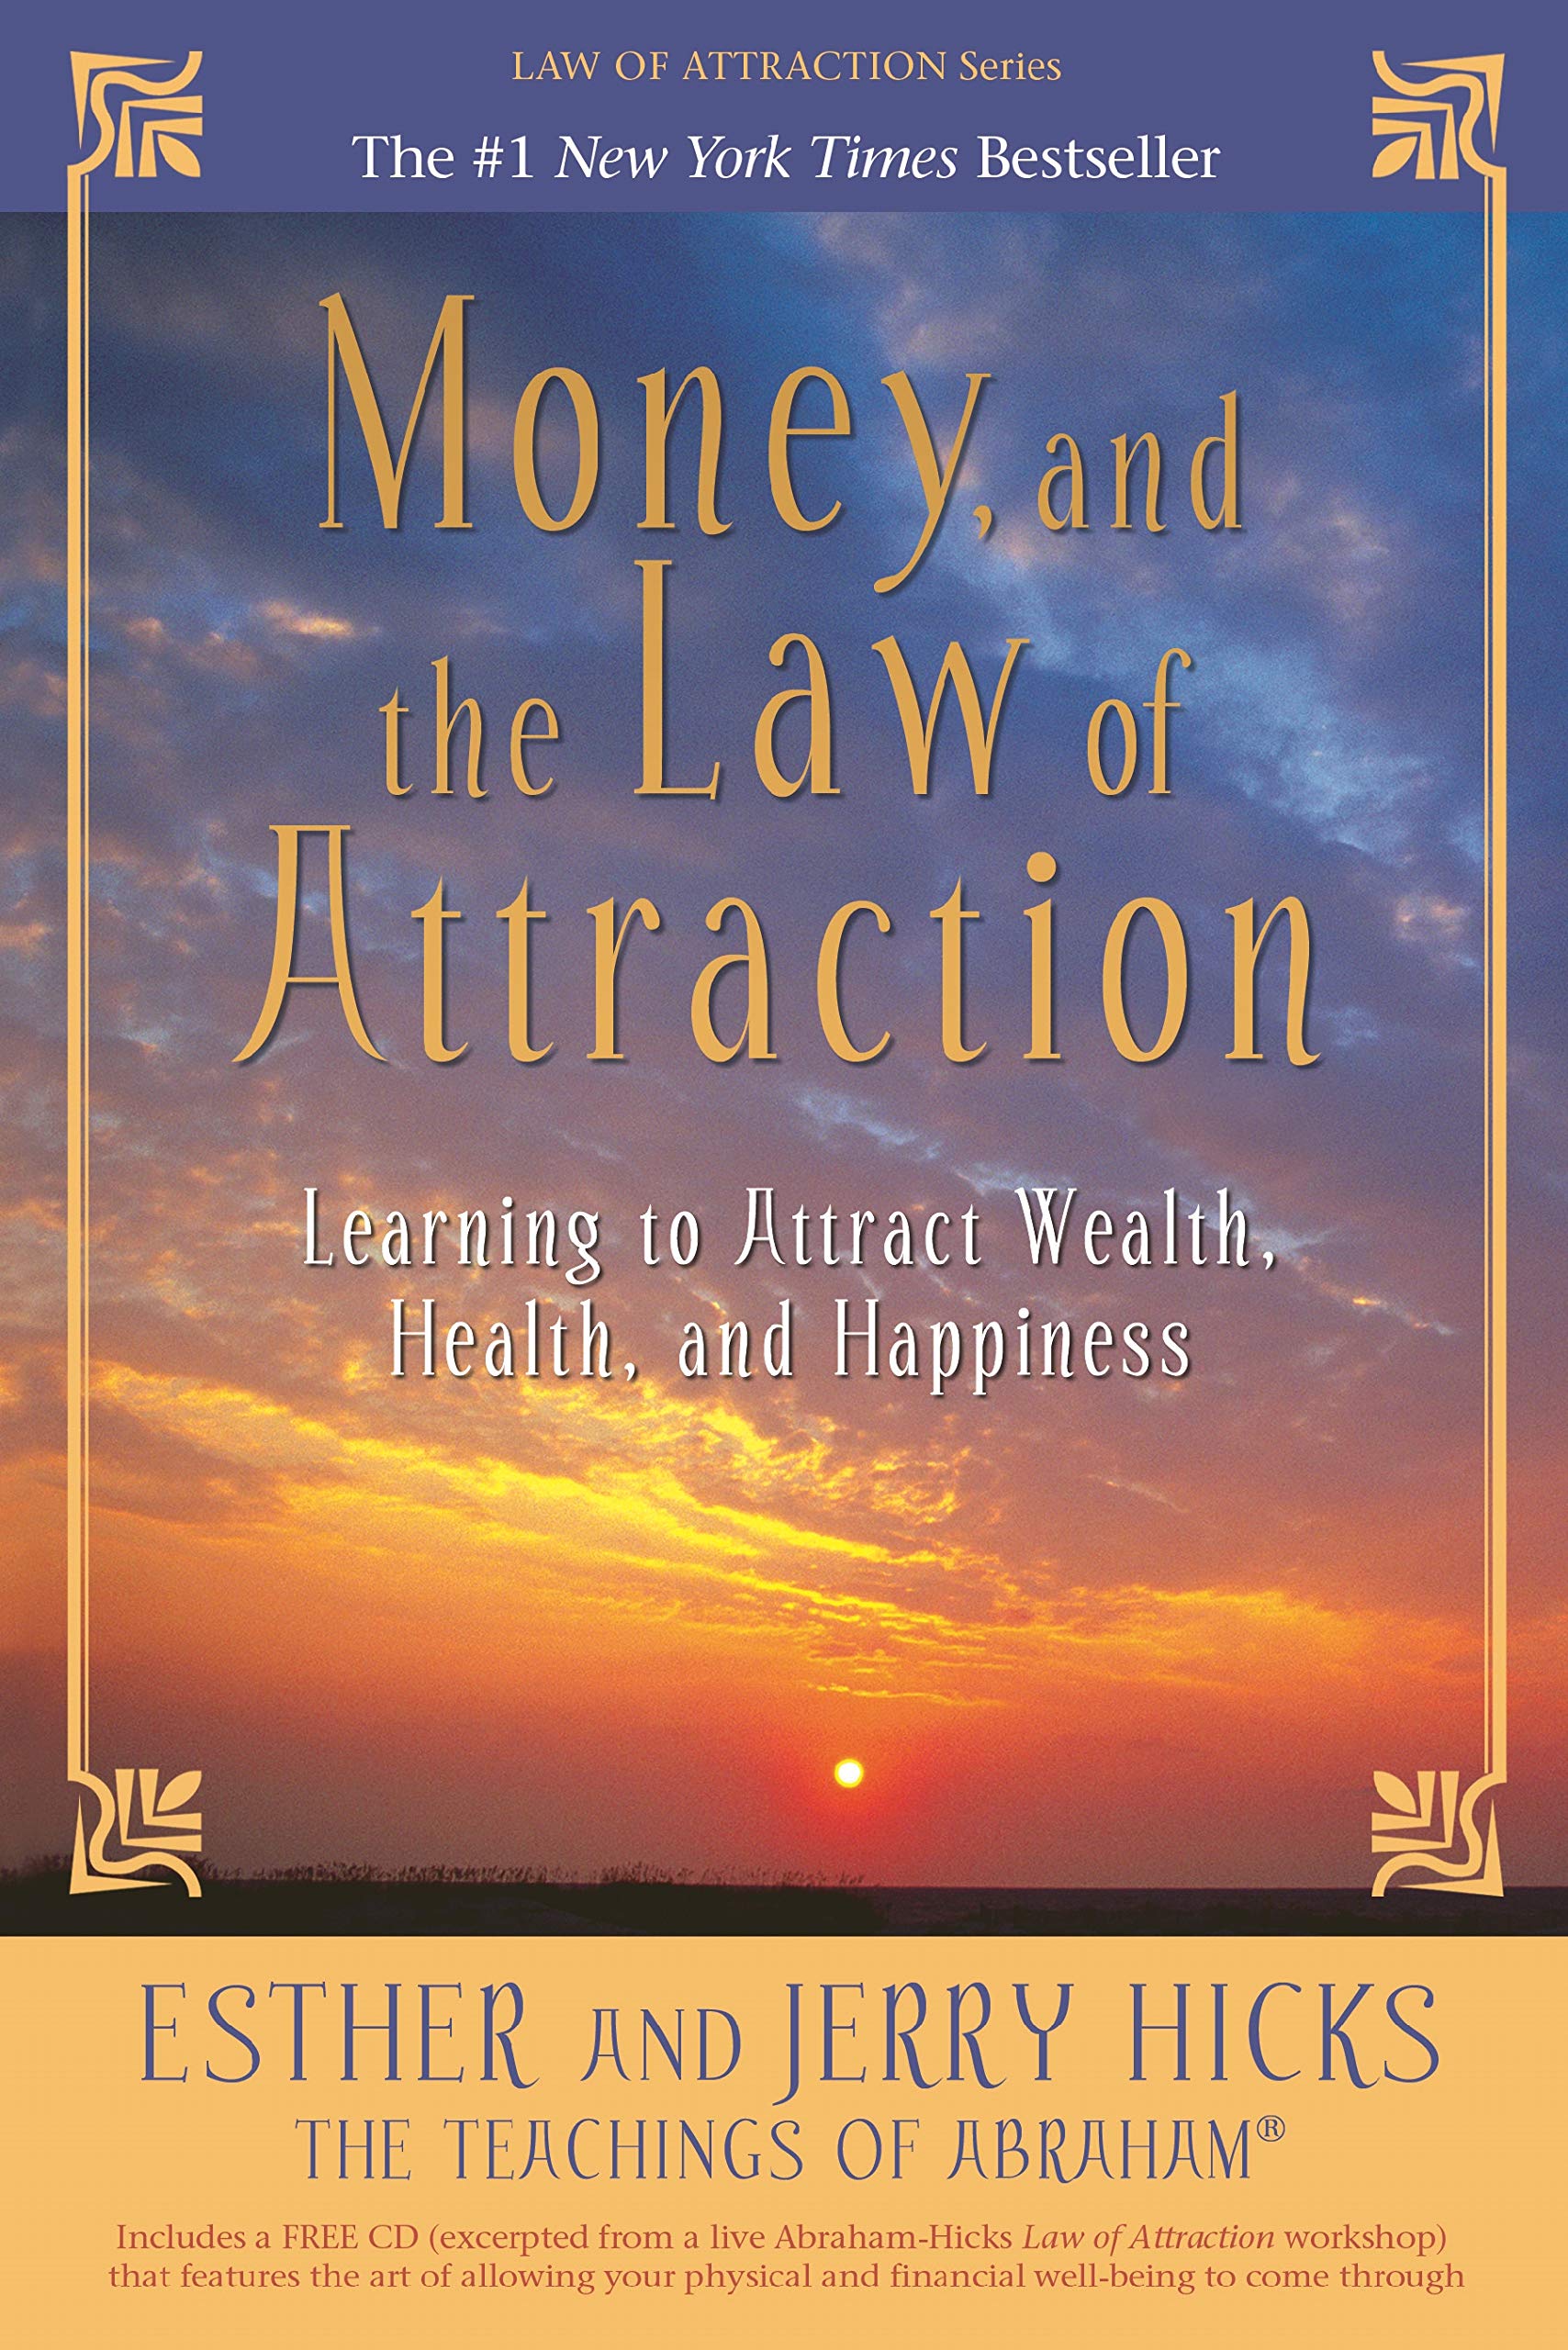 The 9 Books on My Money Mindset Reading List - Money and the Law of Attraction - Full List at www.monicabadiu.com